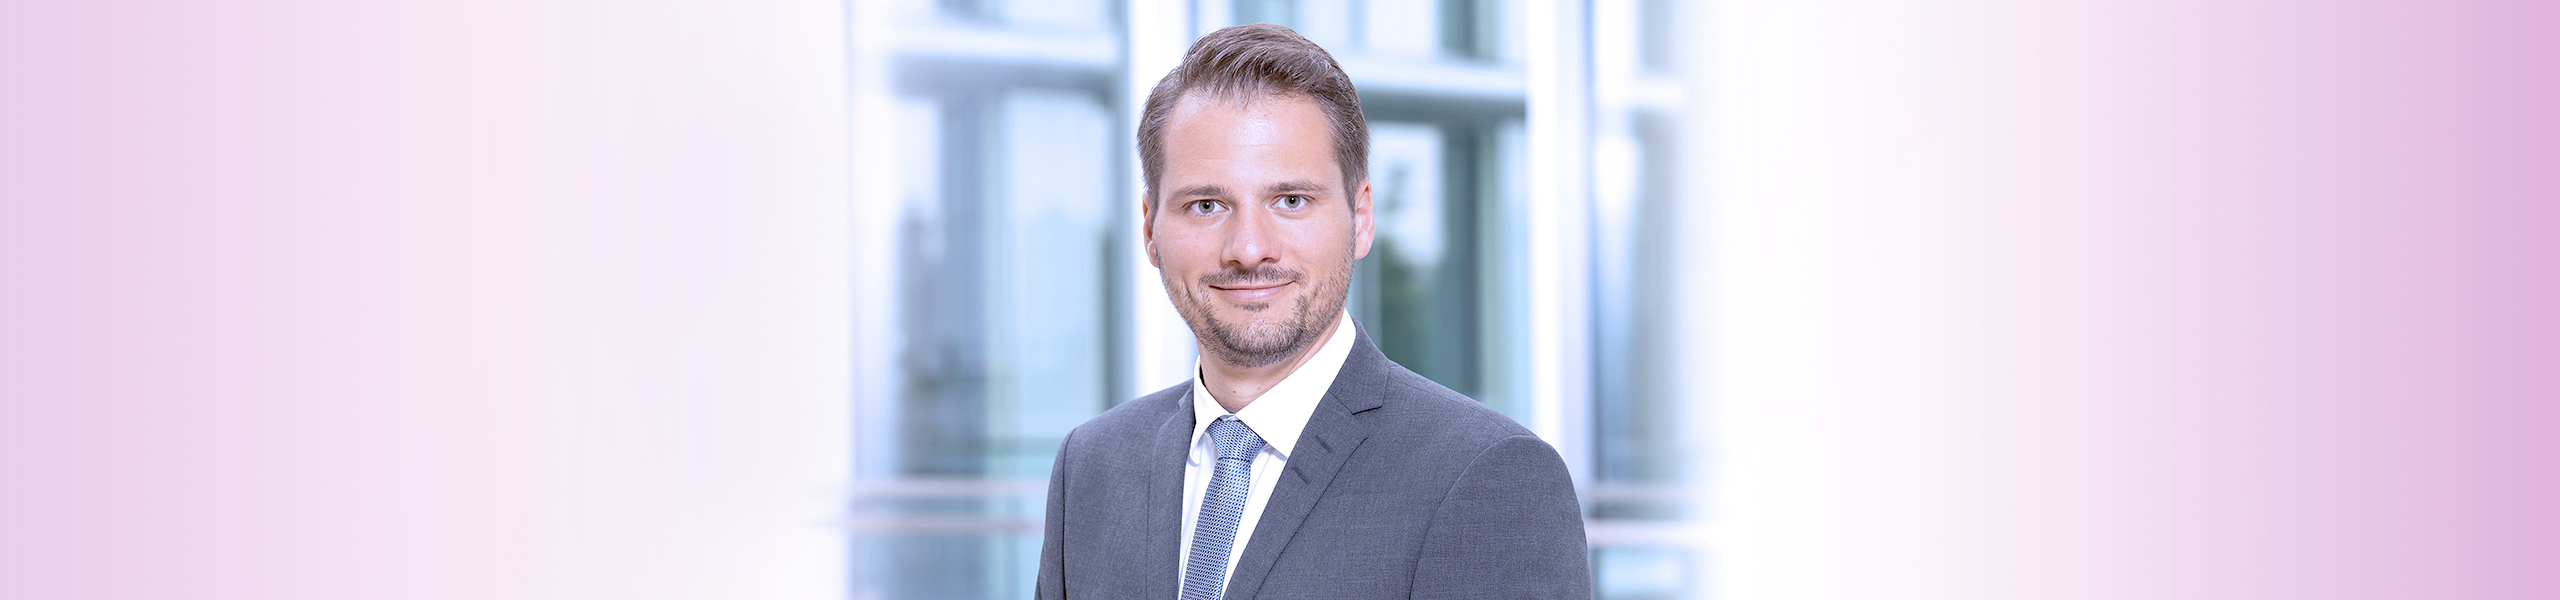 Philipp Lukas Spang Project Manager bei BASF Management Consulting